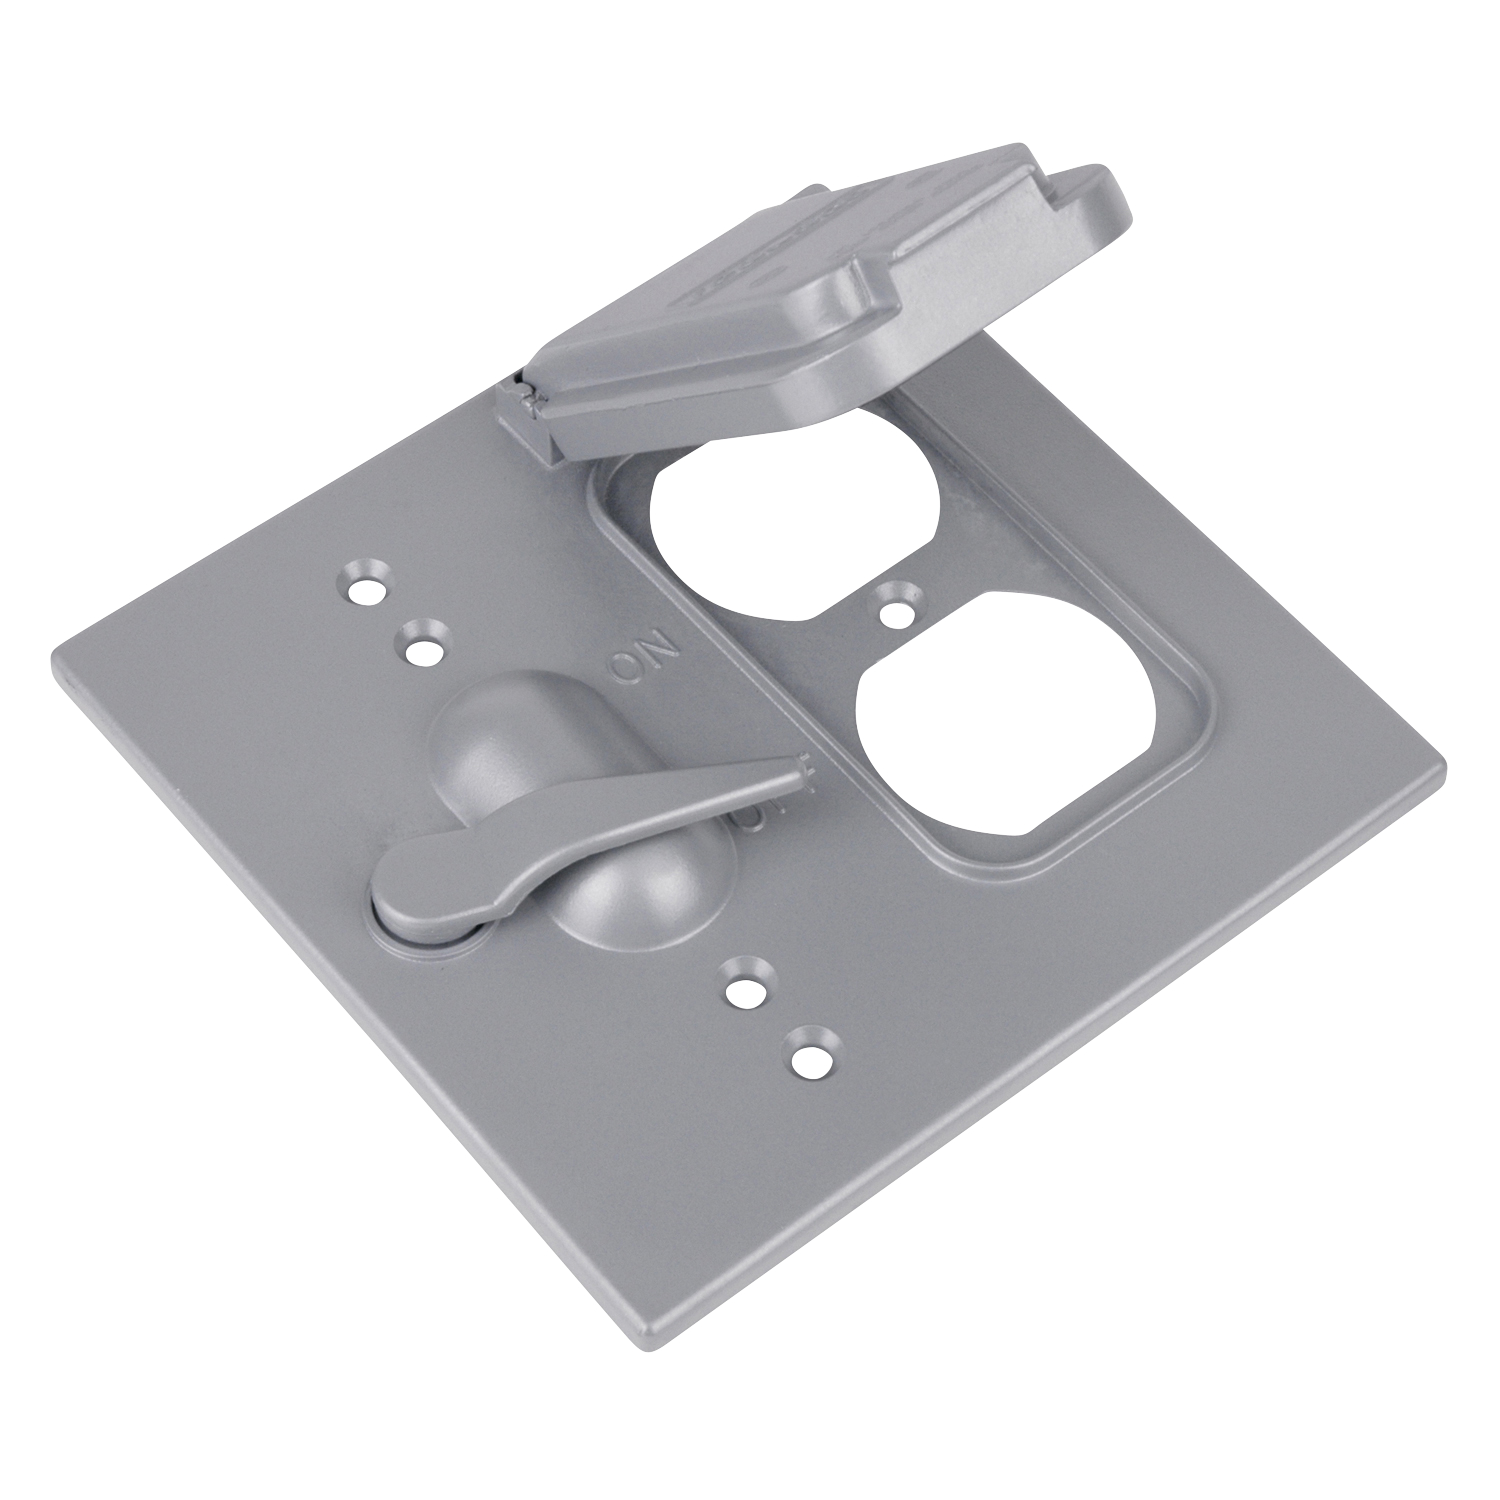 Thomas & Betts CCG-FS 1-Gang Silver GFCI Device Cover with Gaskets and Screws Box Mount 